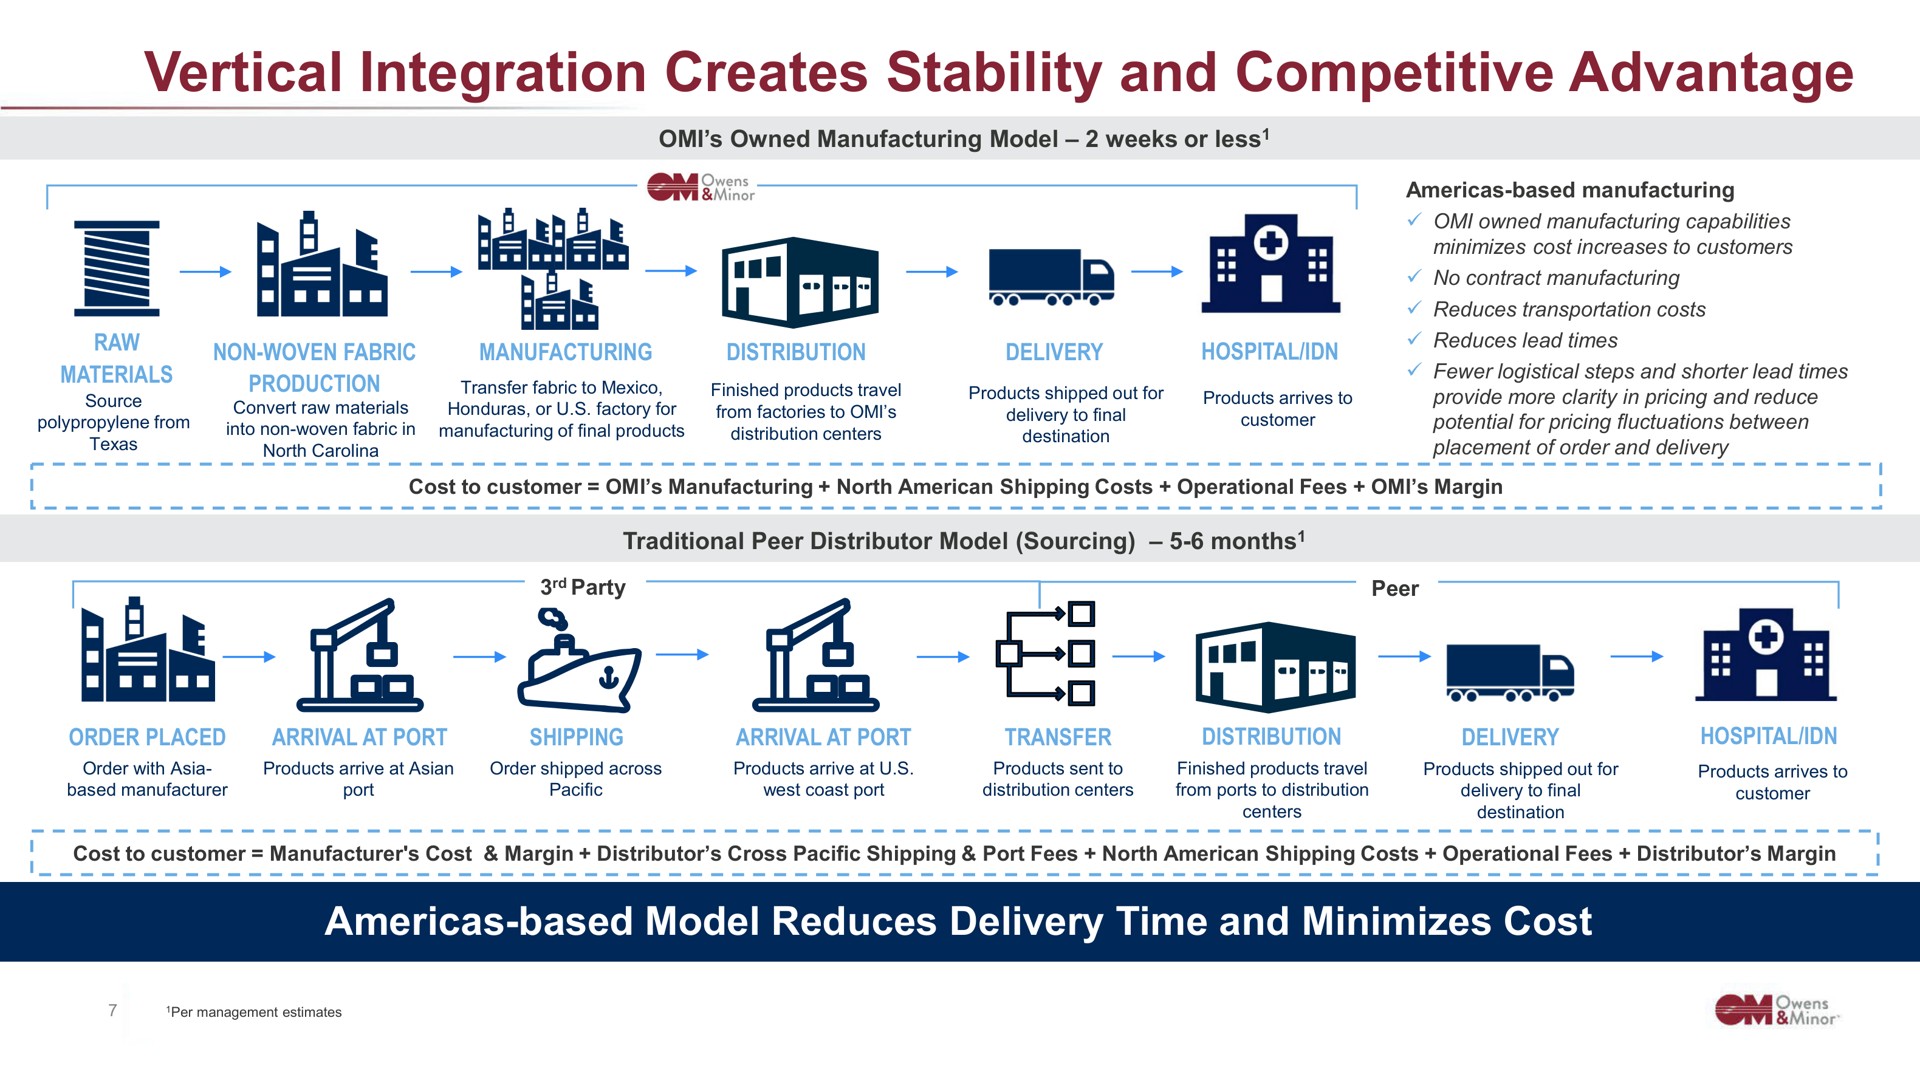 vertical integration creates stability and competitive advantage based model reduces delivery time and minimizes cost | Owens&Minor